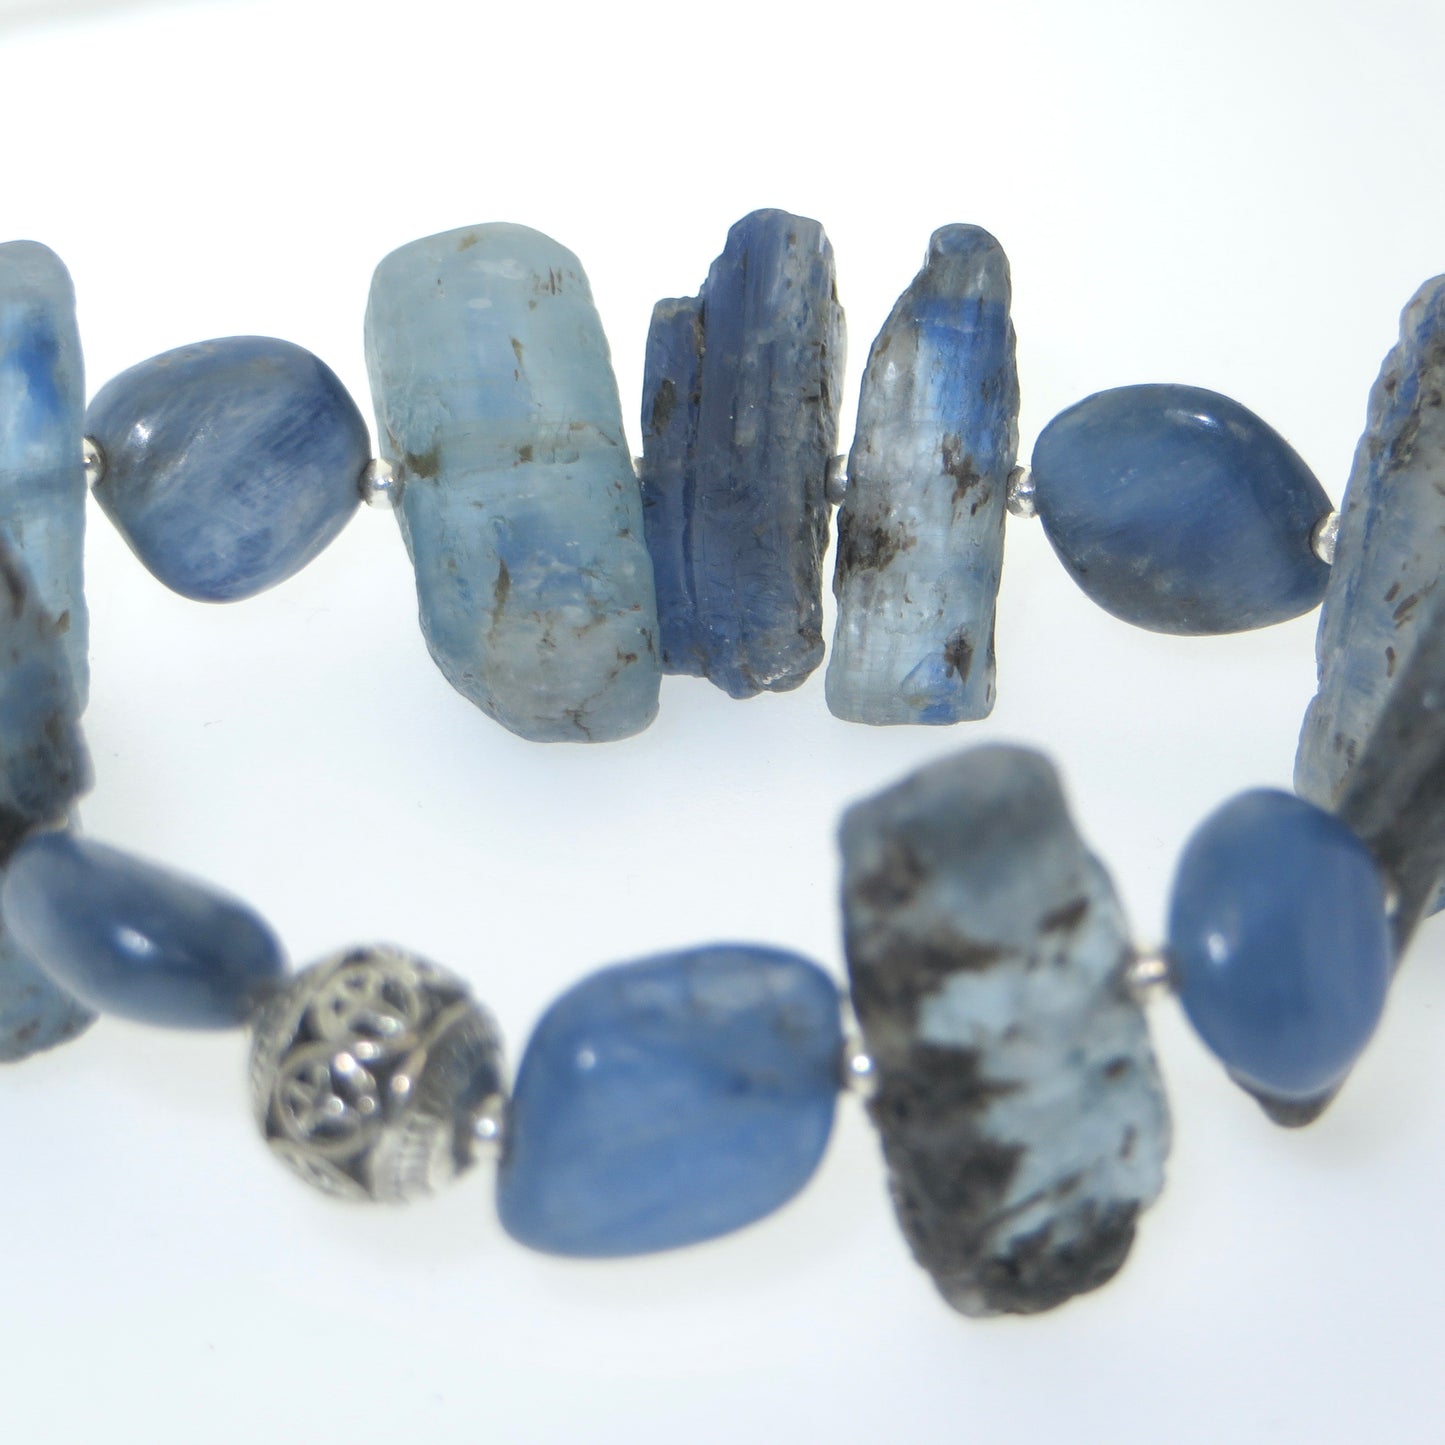 Peaceful Truth Peacemaker - Kyanite Bracelet with Sterling beads